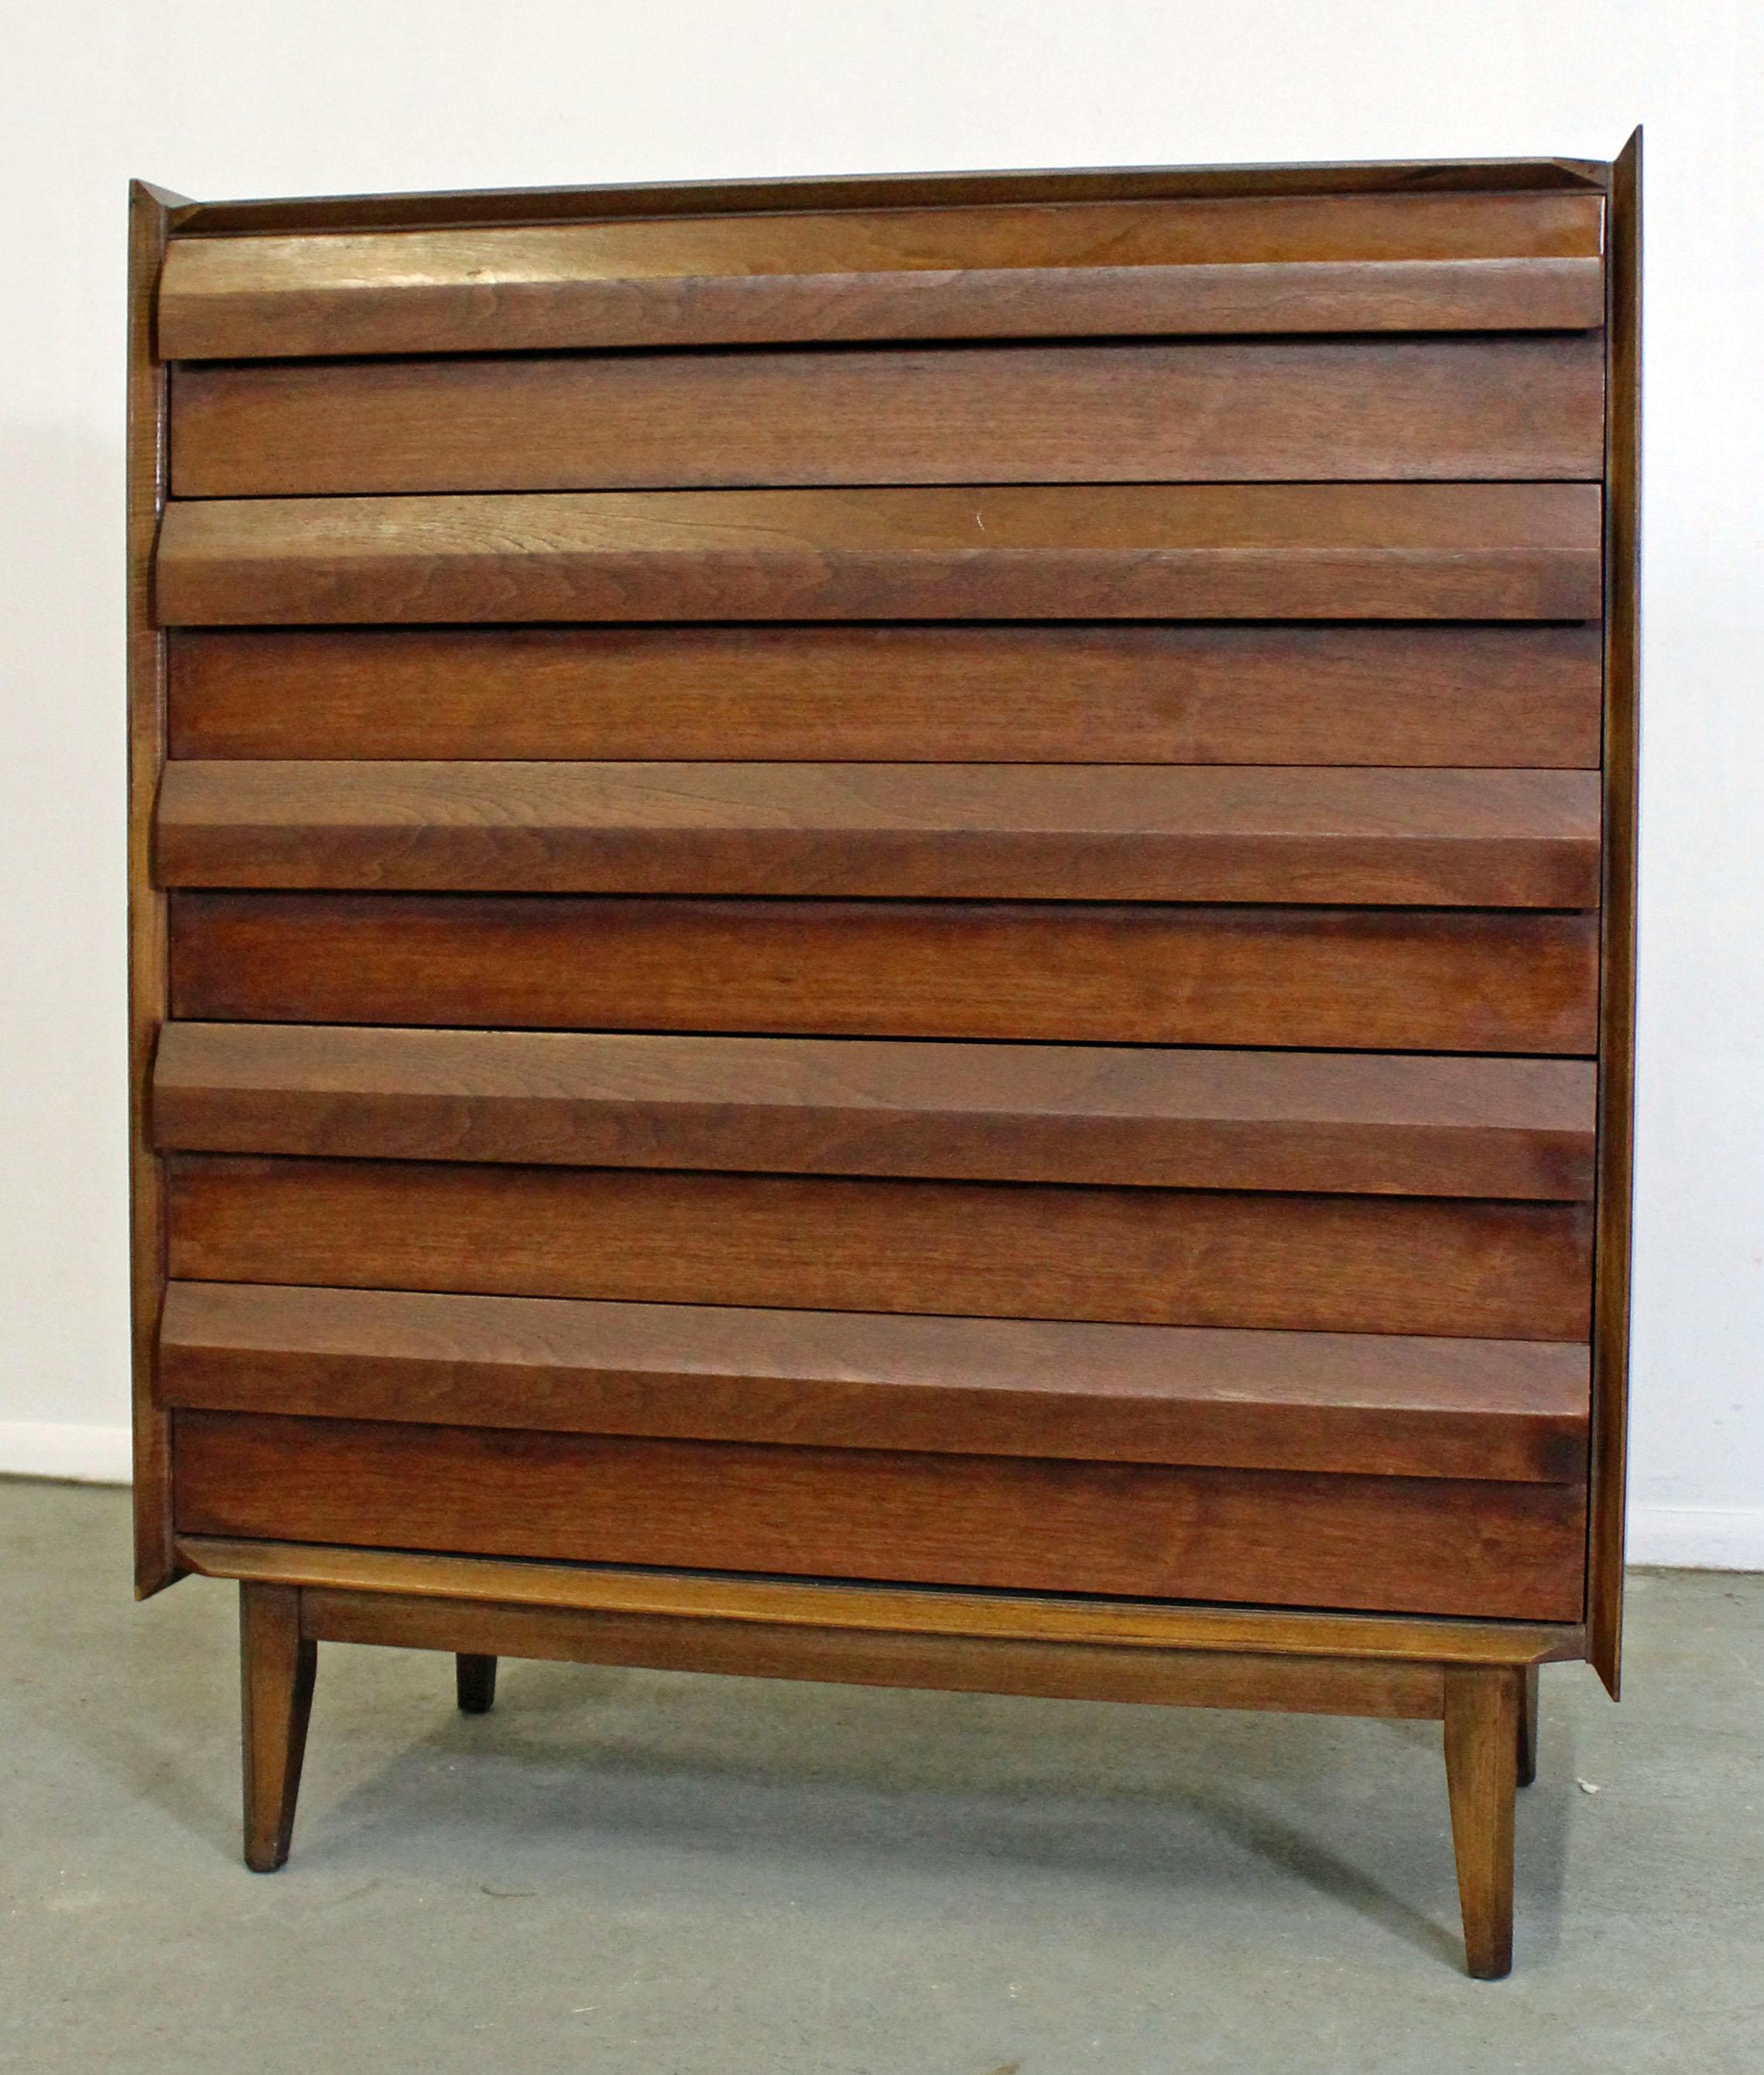 Offered is a Mid-Century Modern tall chest dresser made by Lane 